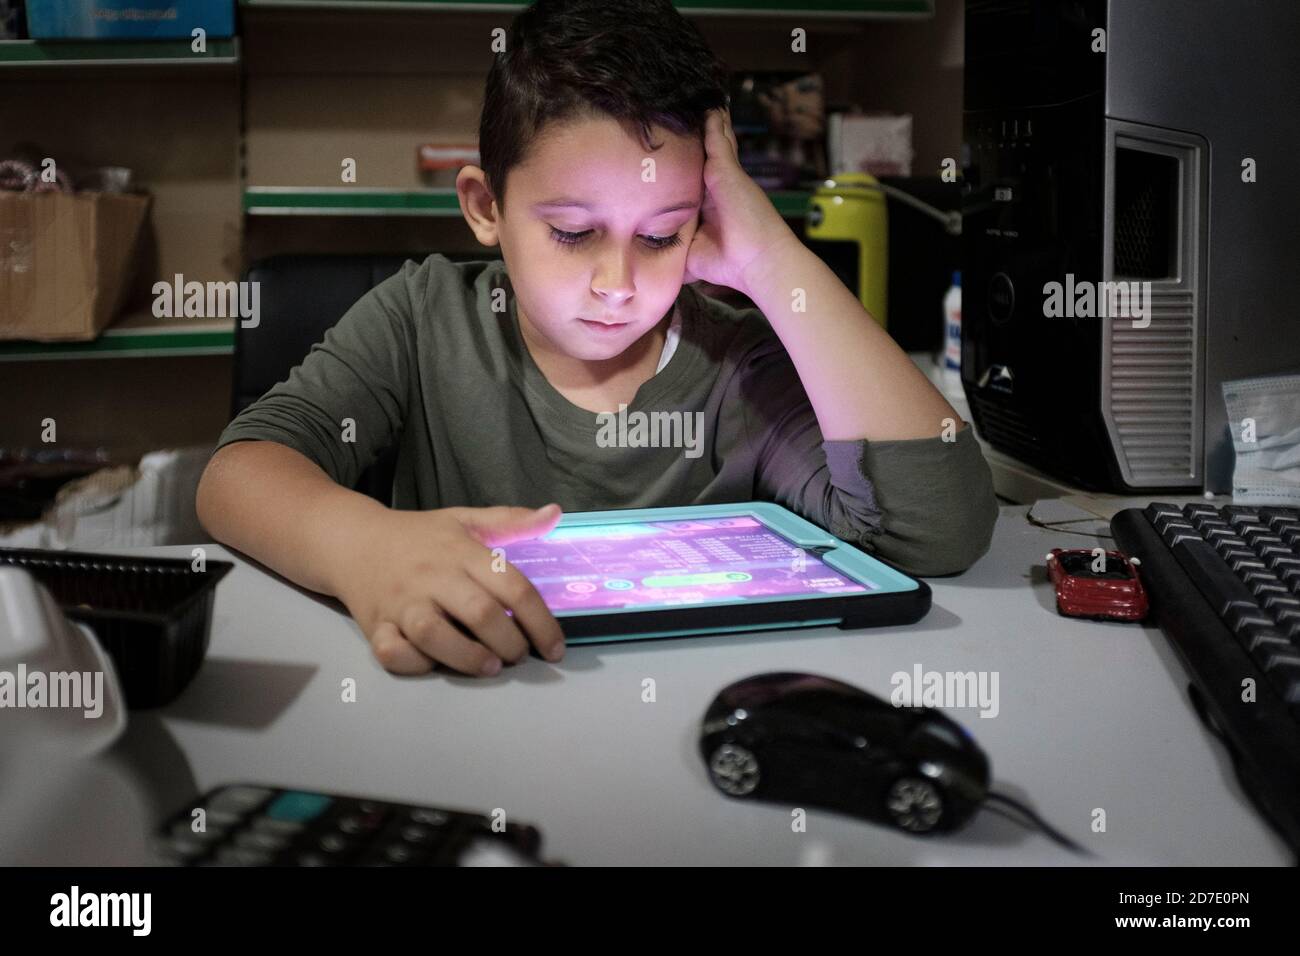 Middle Eastern boy , age 6 playing games on computer tablet Stock Photo